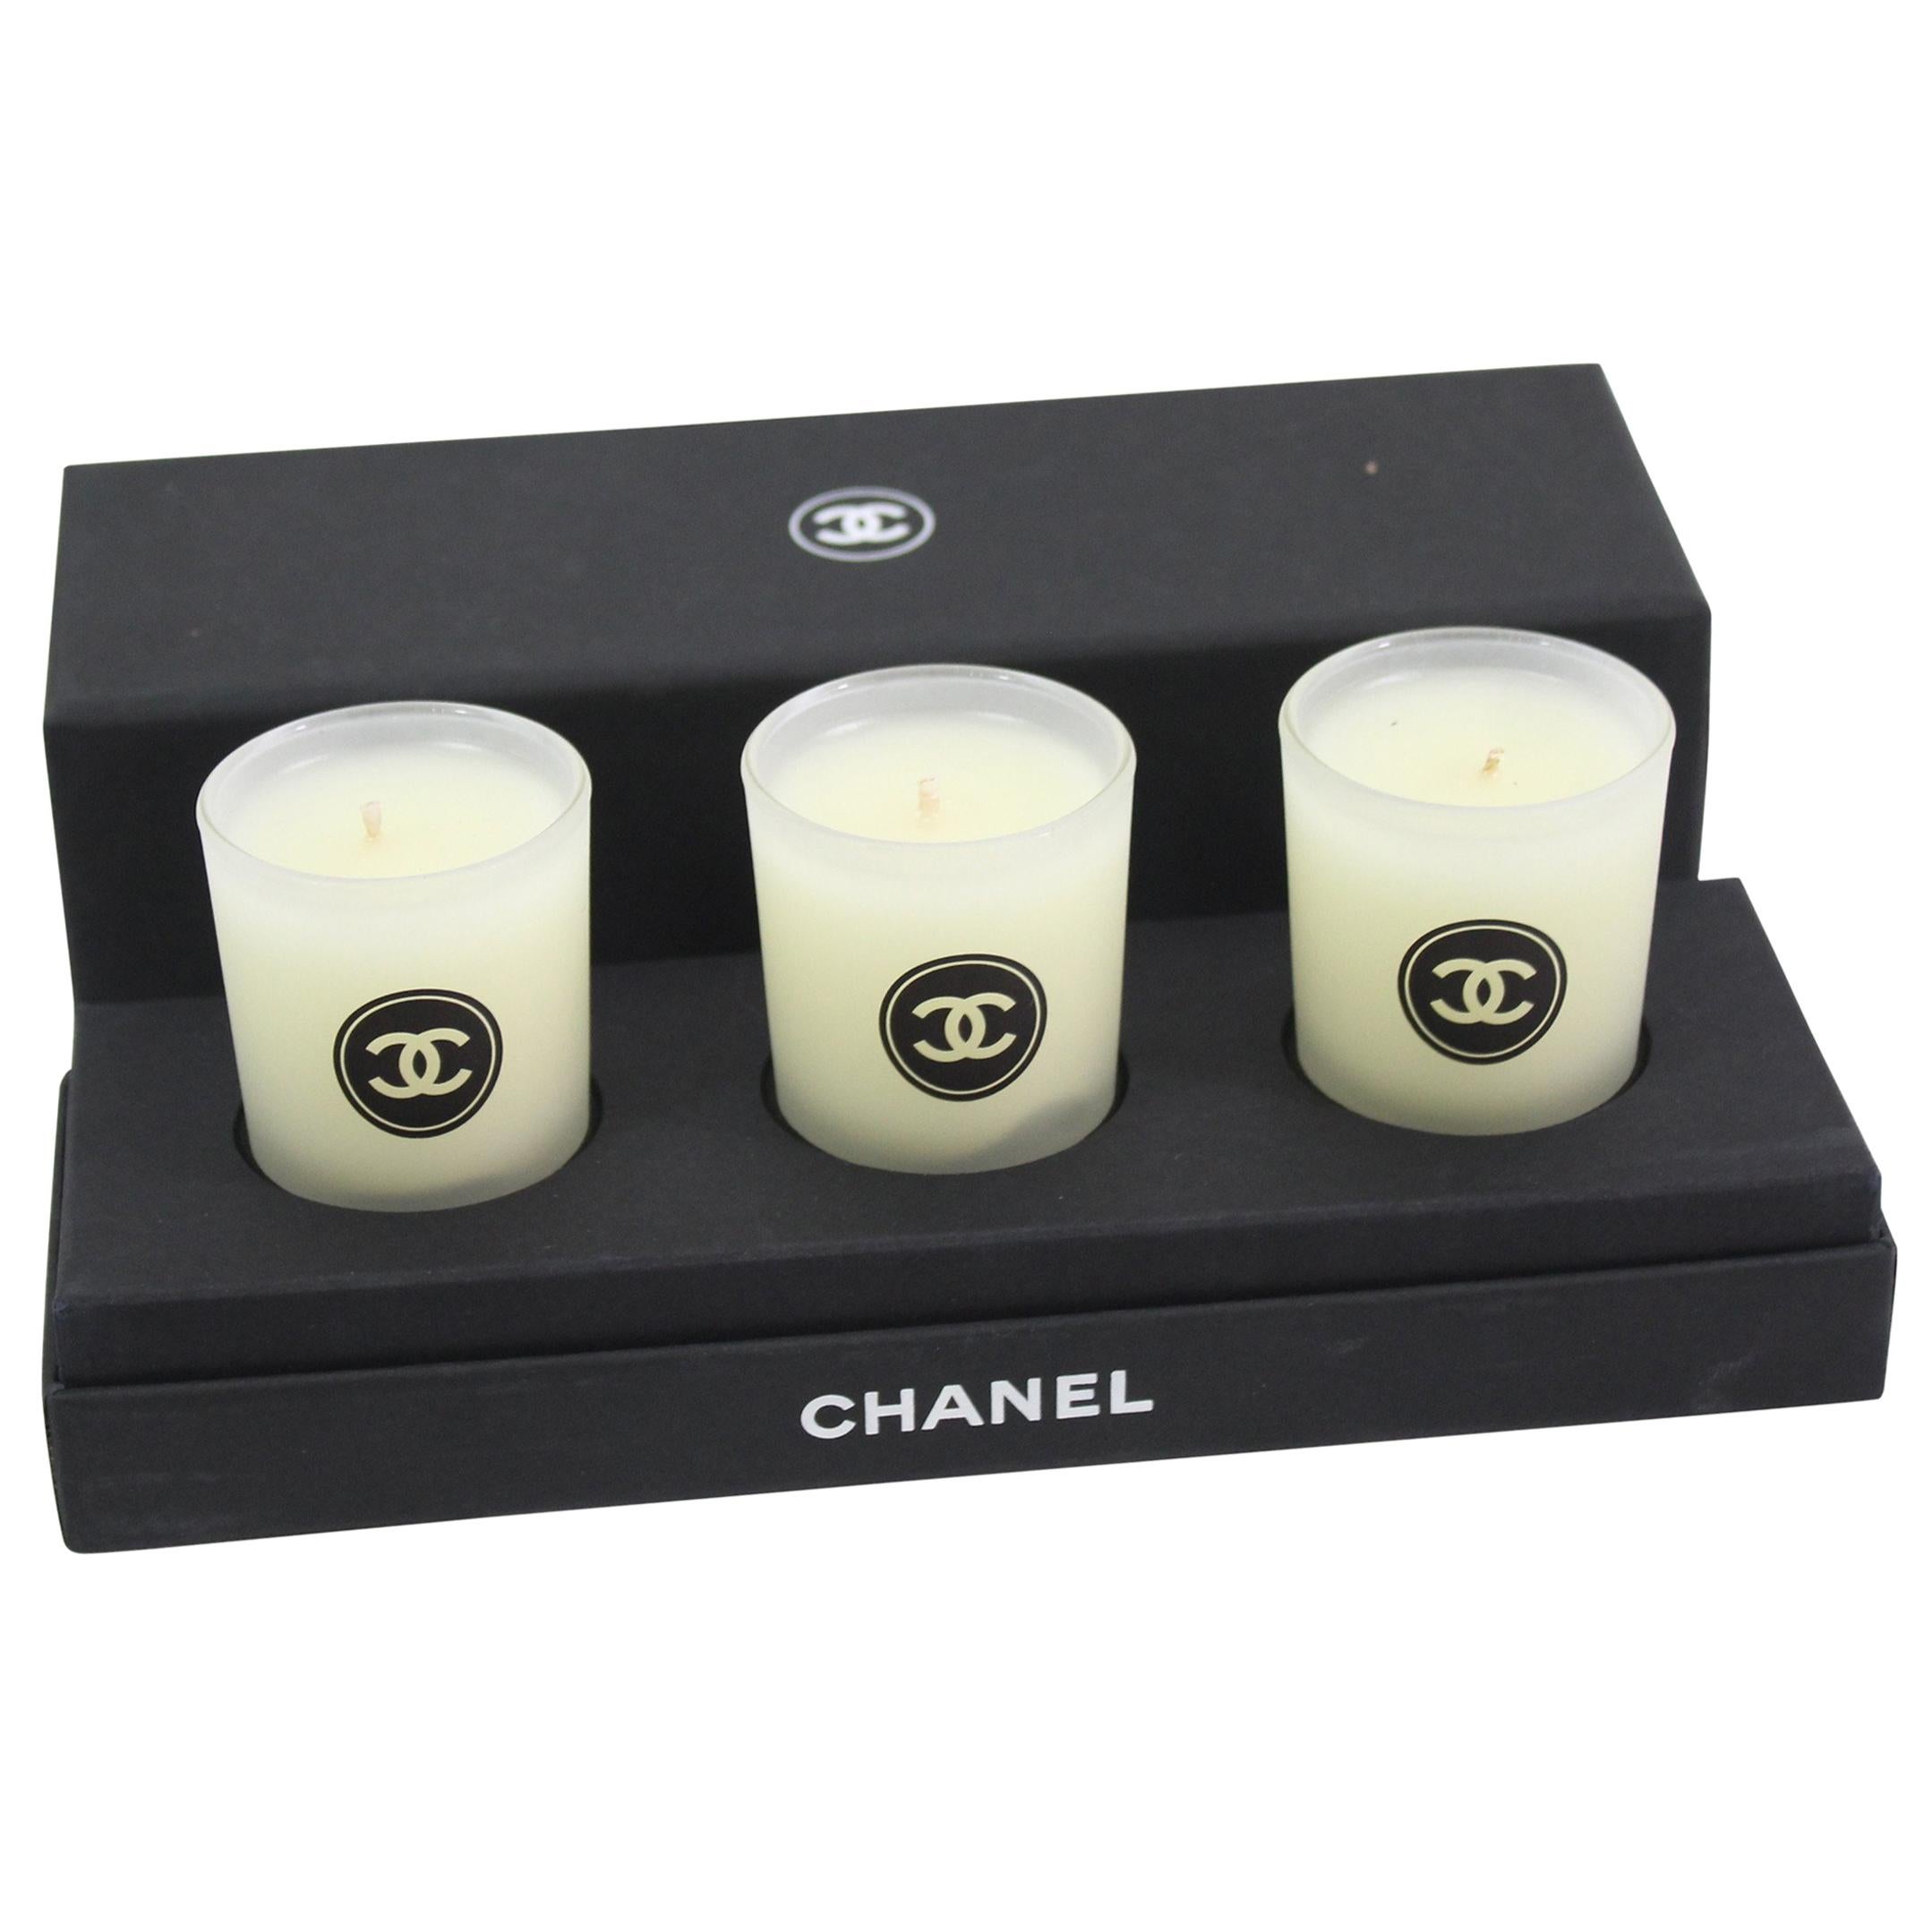 Chanel Perfume Candle Gift Set Home Decor shop online – LNB Luxury Candles  Home Decor